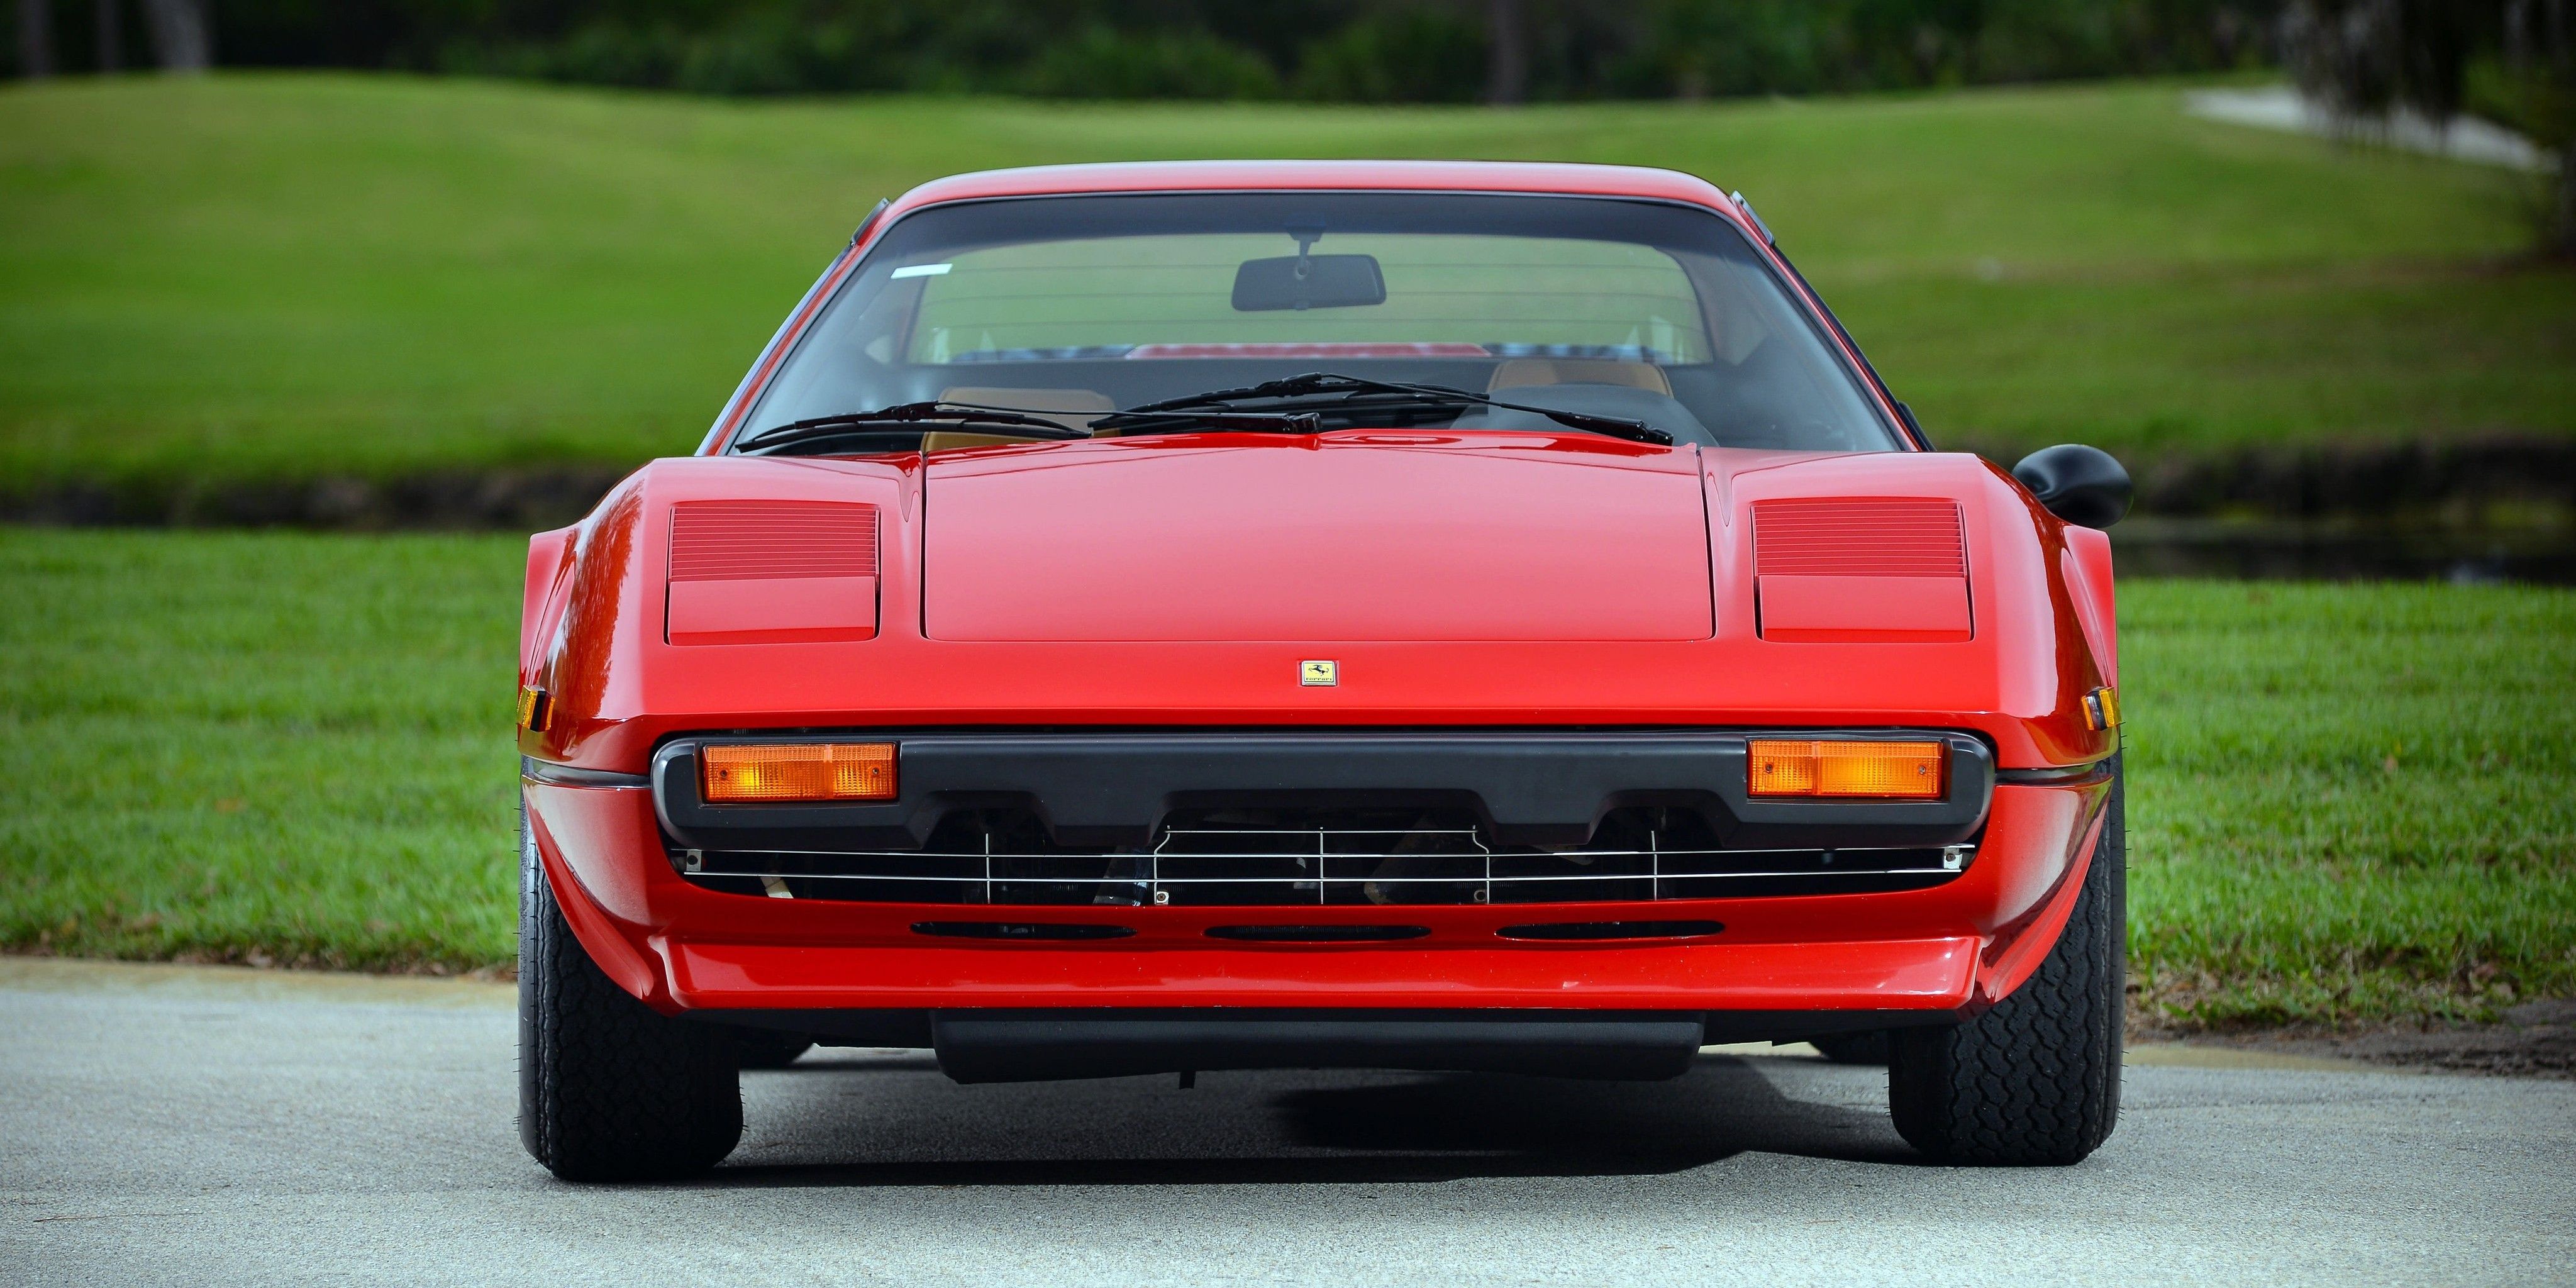 A Frontal Picture Of A Parked Red 1975 Ferrari 308 GTB